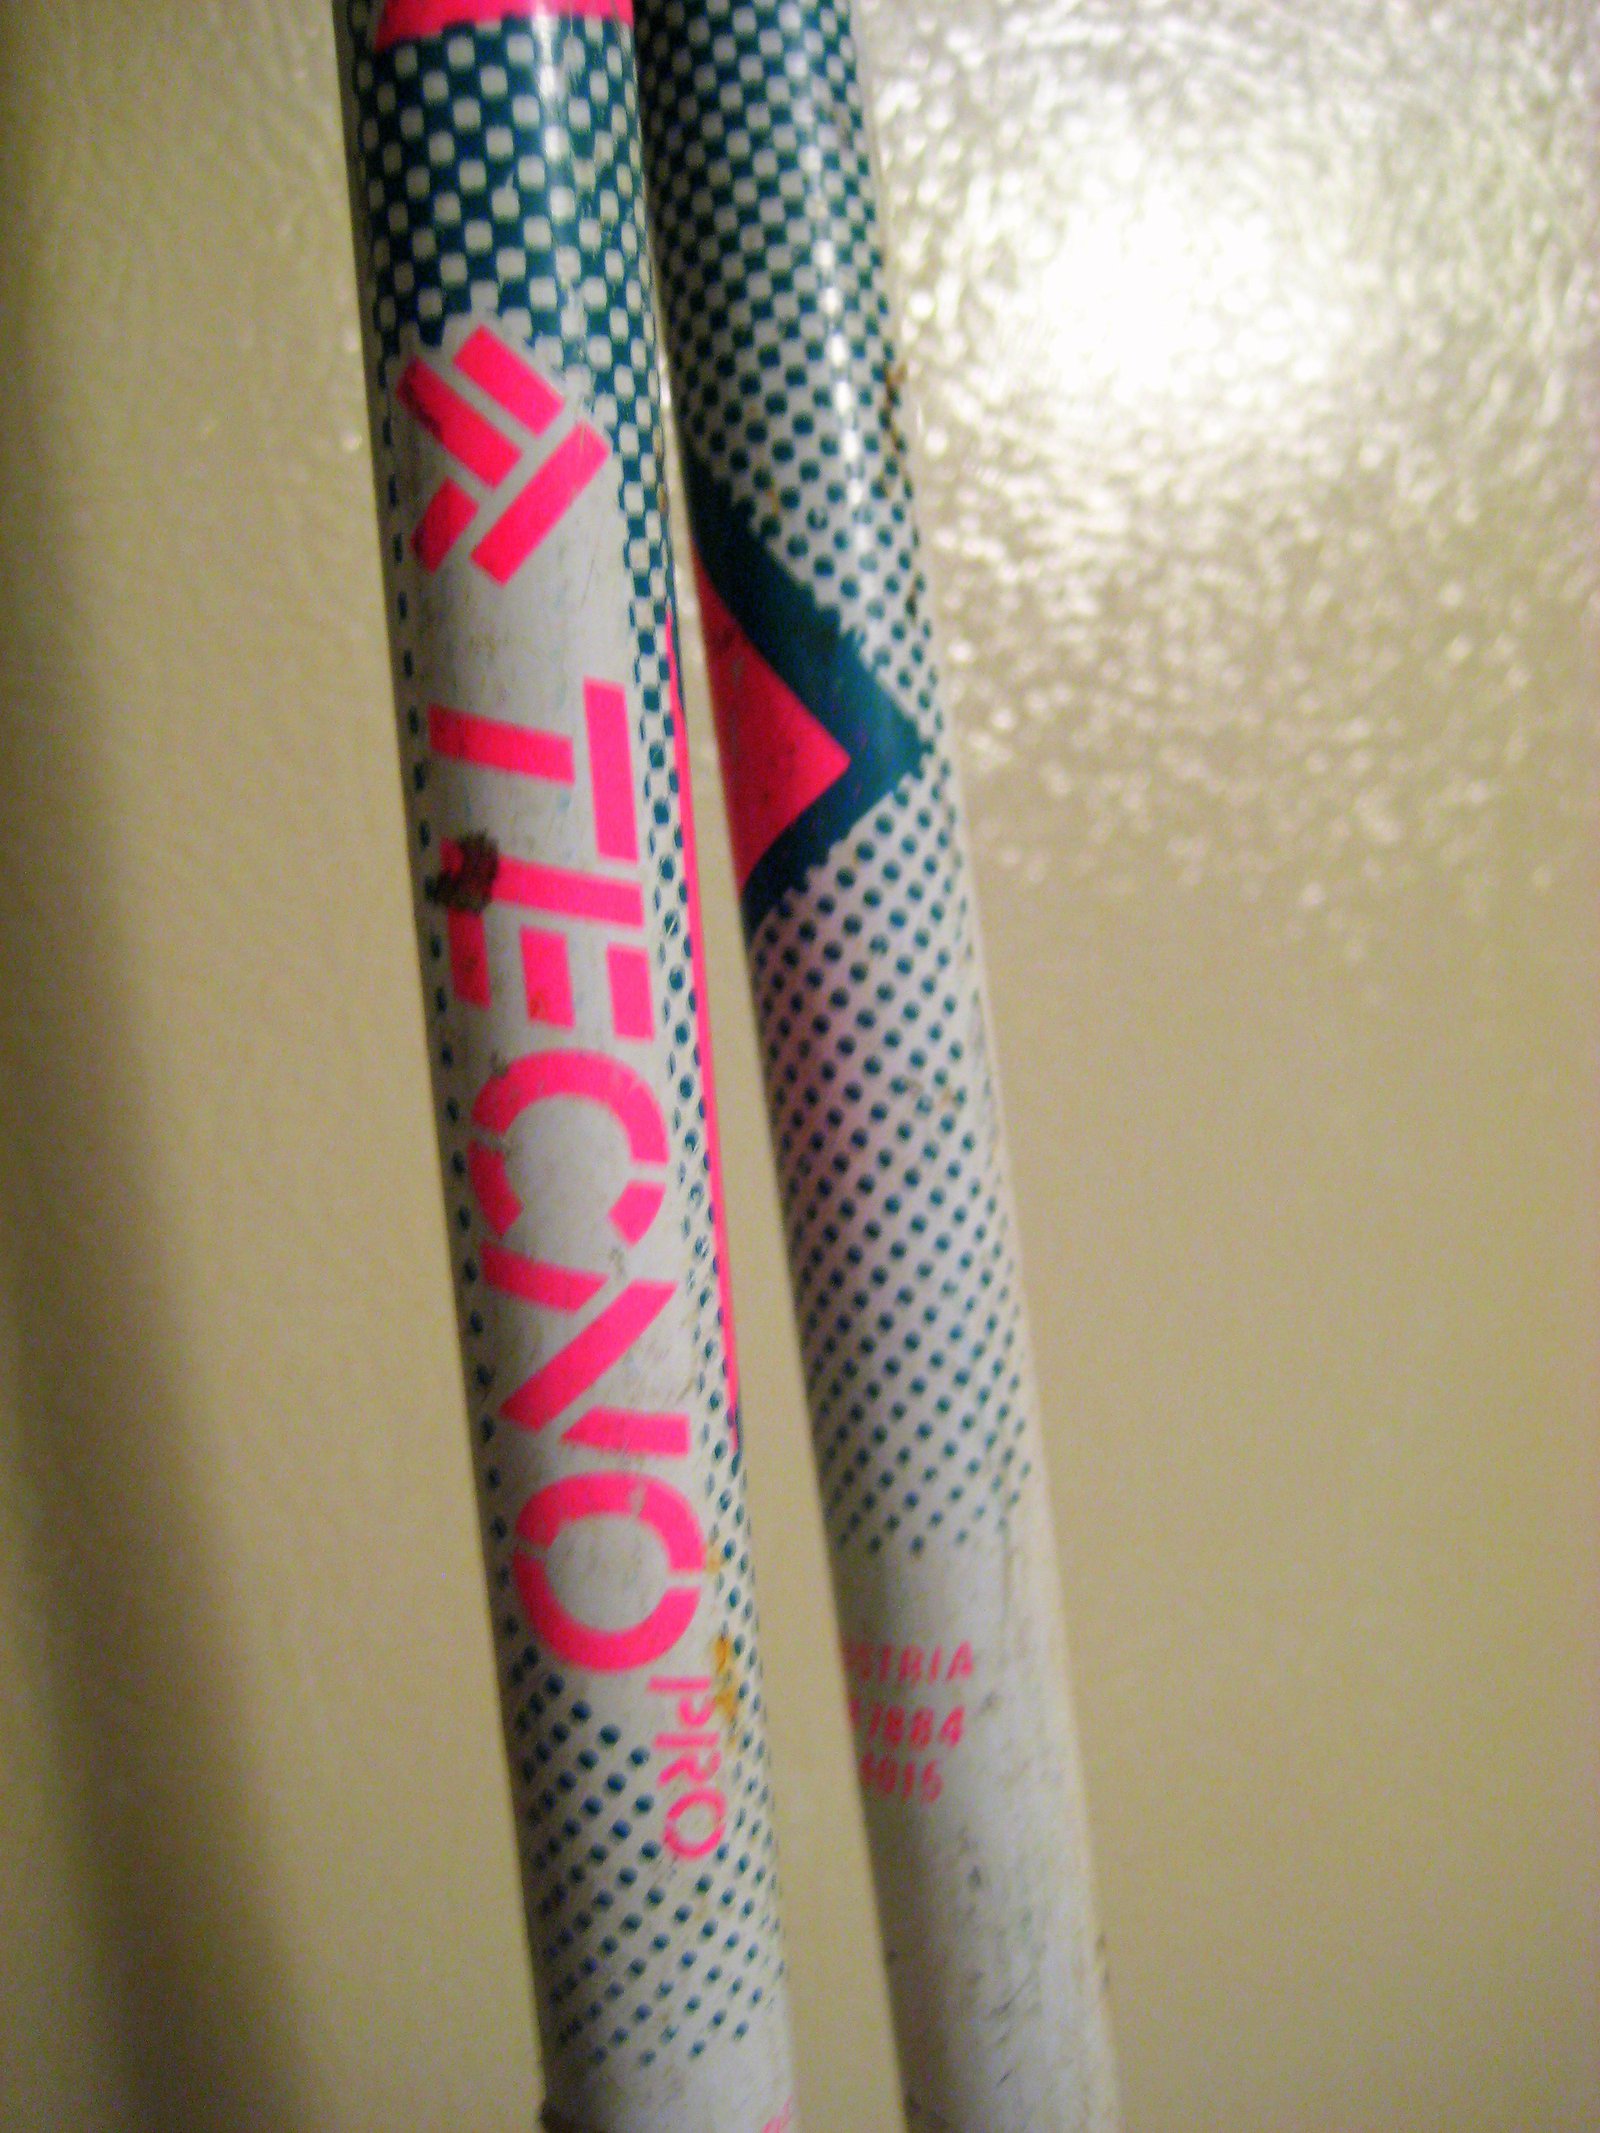 My new poles - so G - 3 of 3